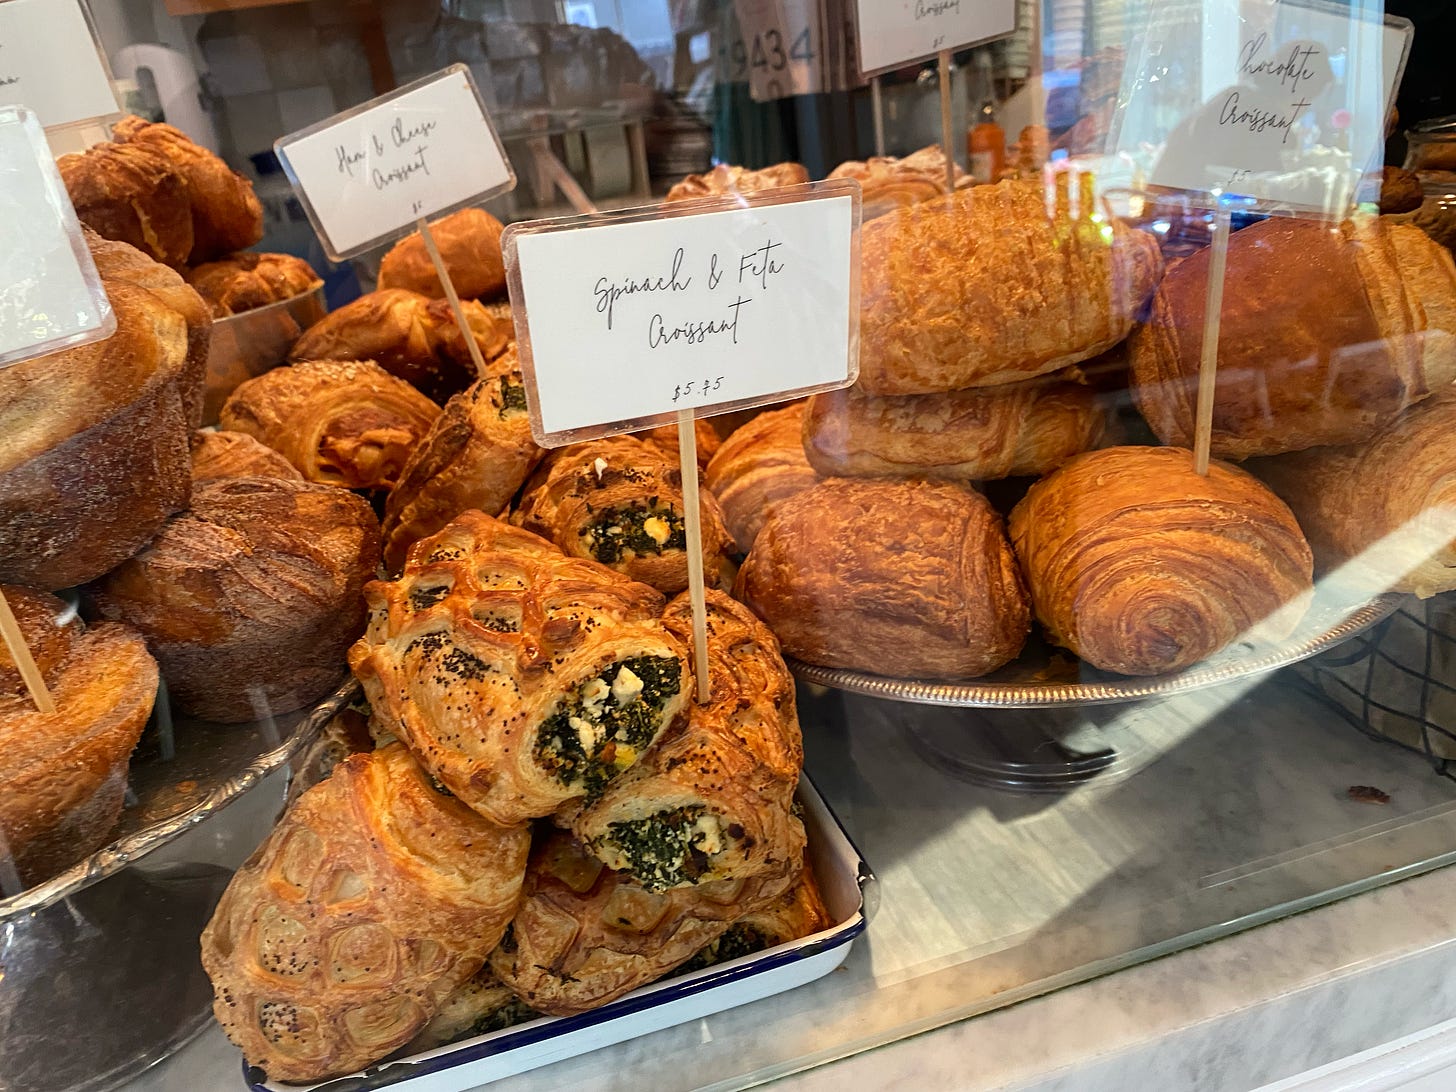 A glass case full of croissants.